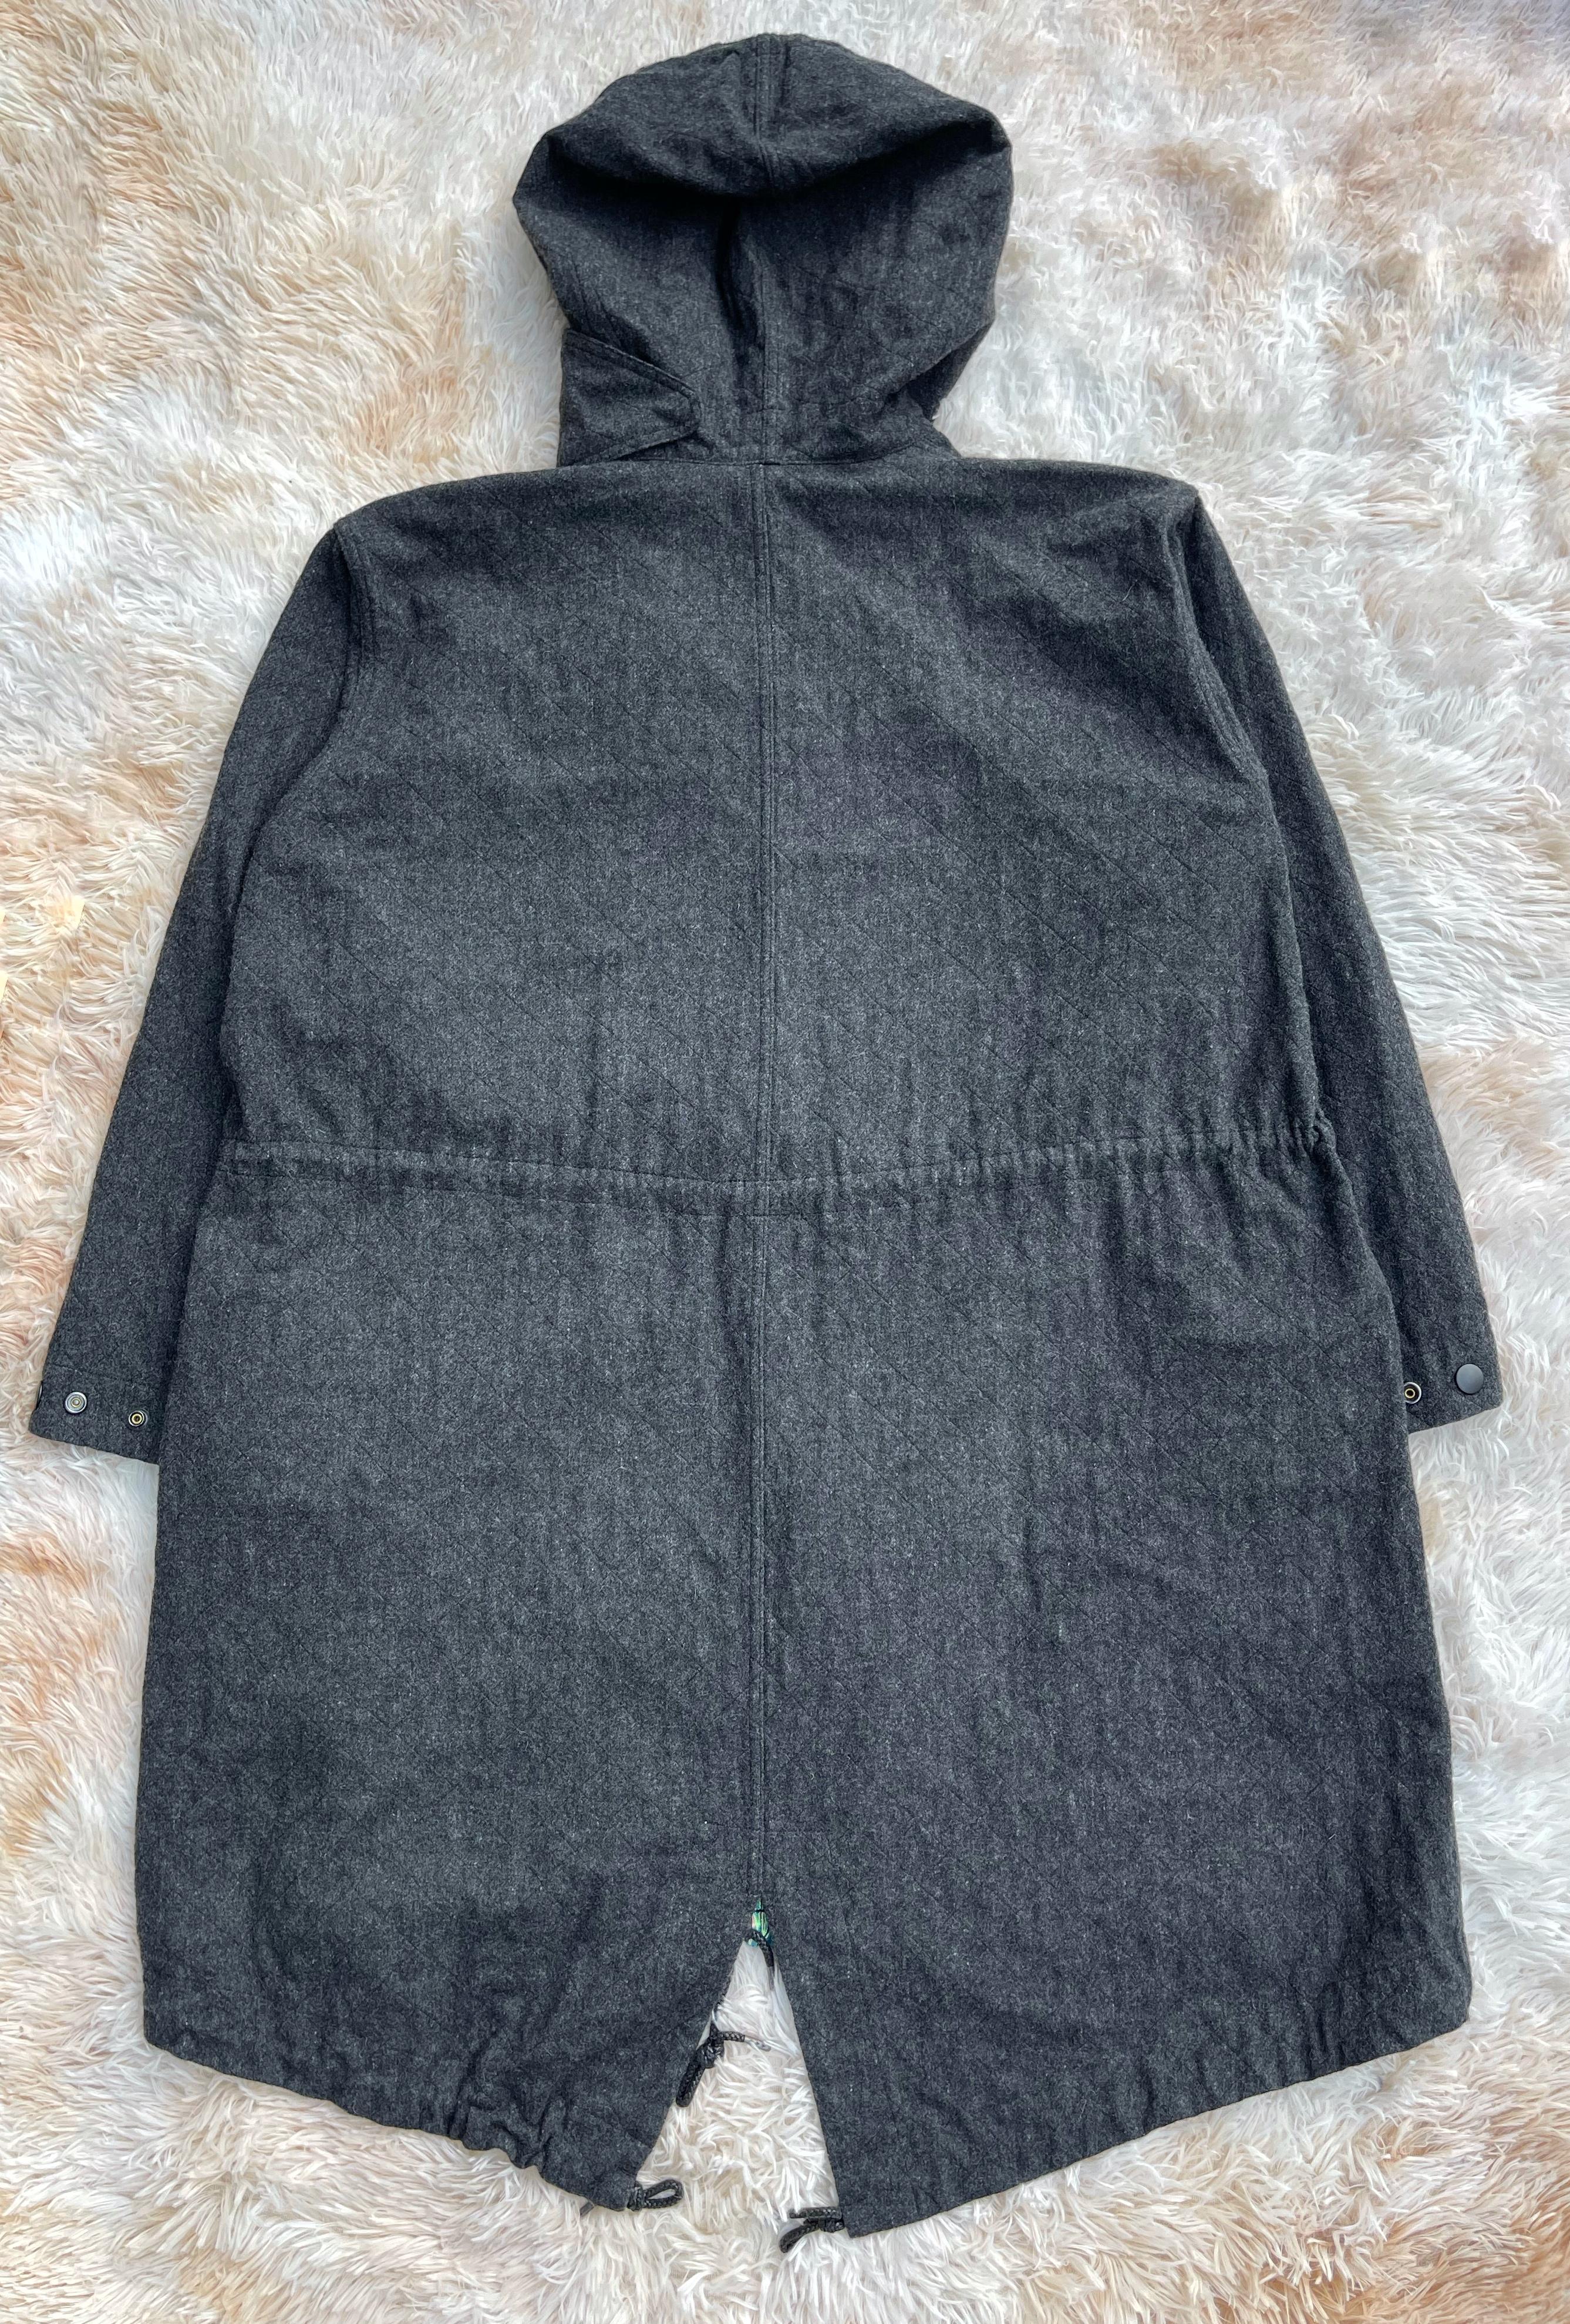 A/W2014 Issey Miyake Iridescent Fishtail Parka  In Excellent Condition For Sale In Seattle, WA